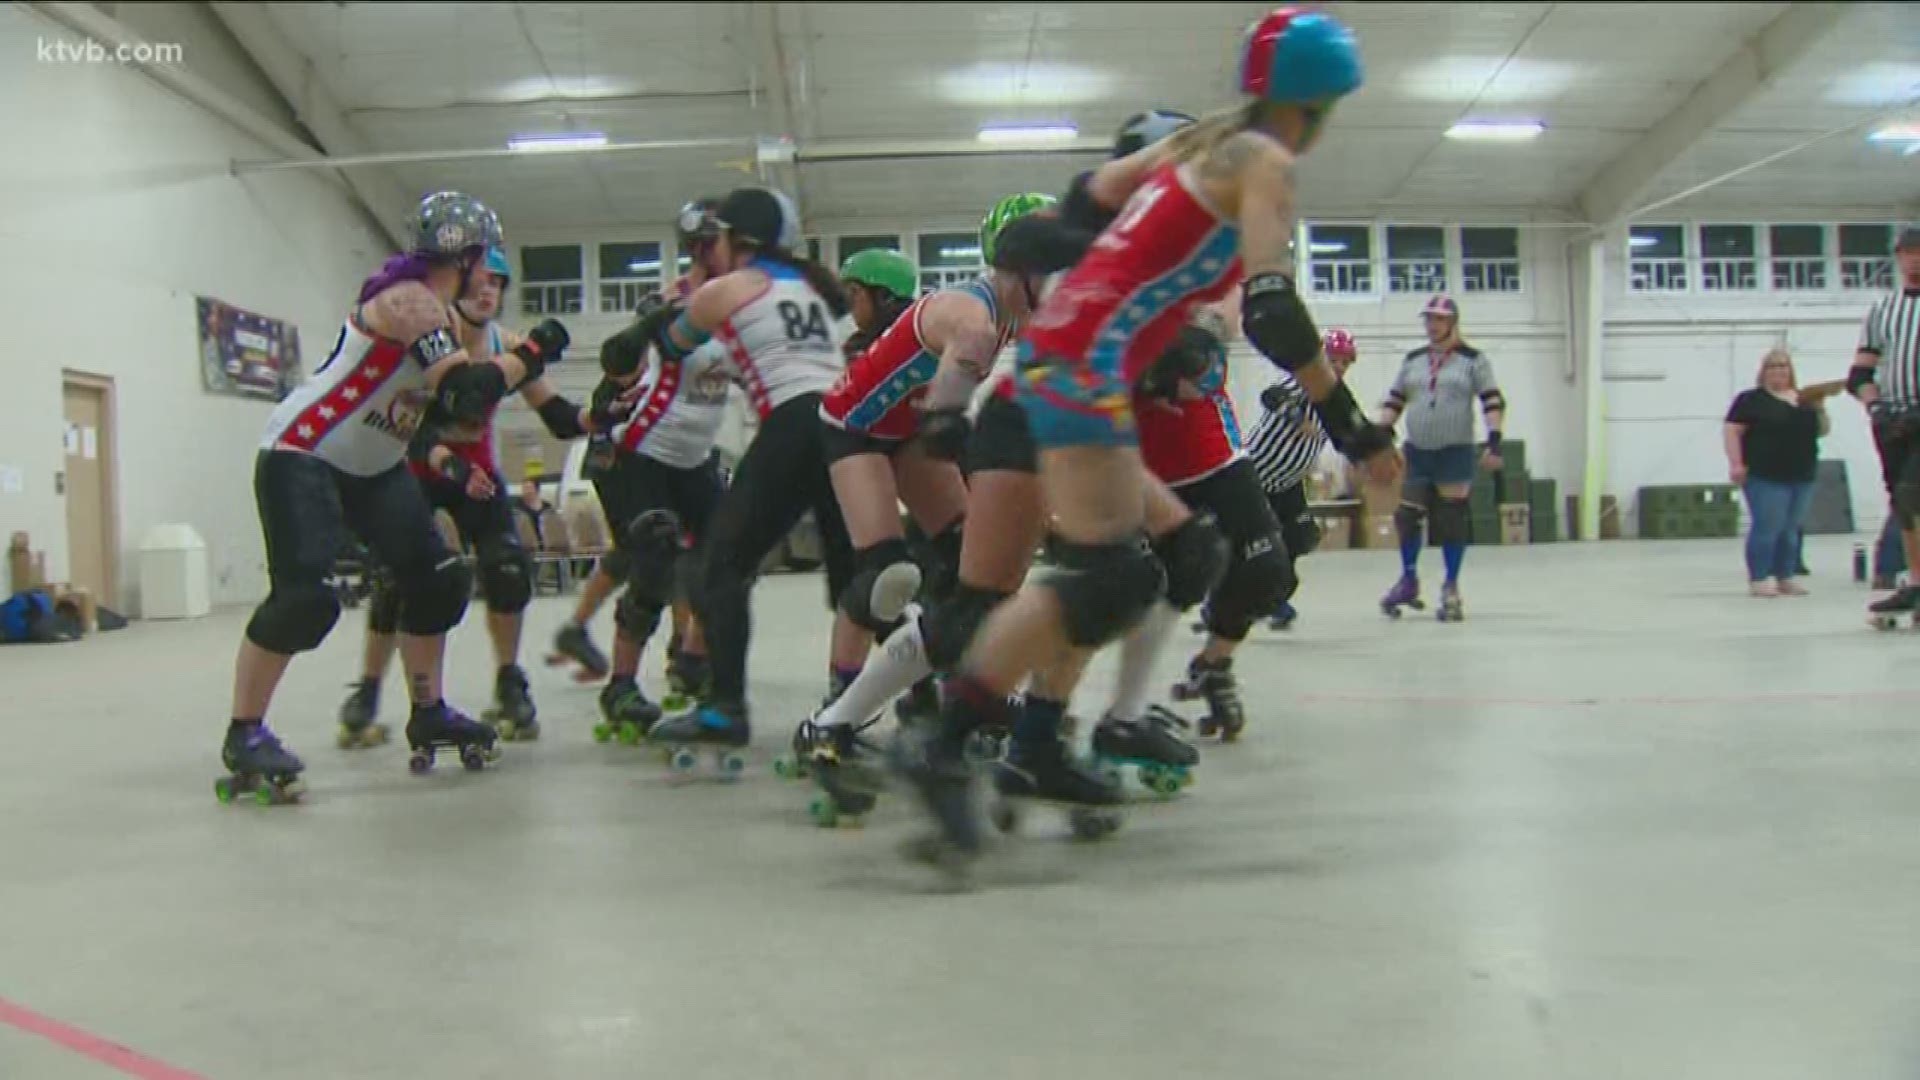 The new roller derby team hopes to grow and develop together was they get ready to start their season in Canyon County.